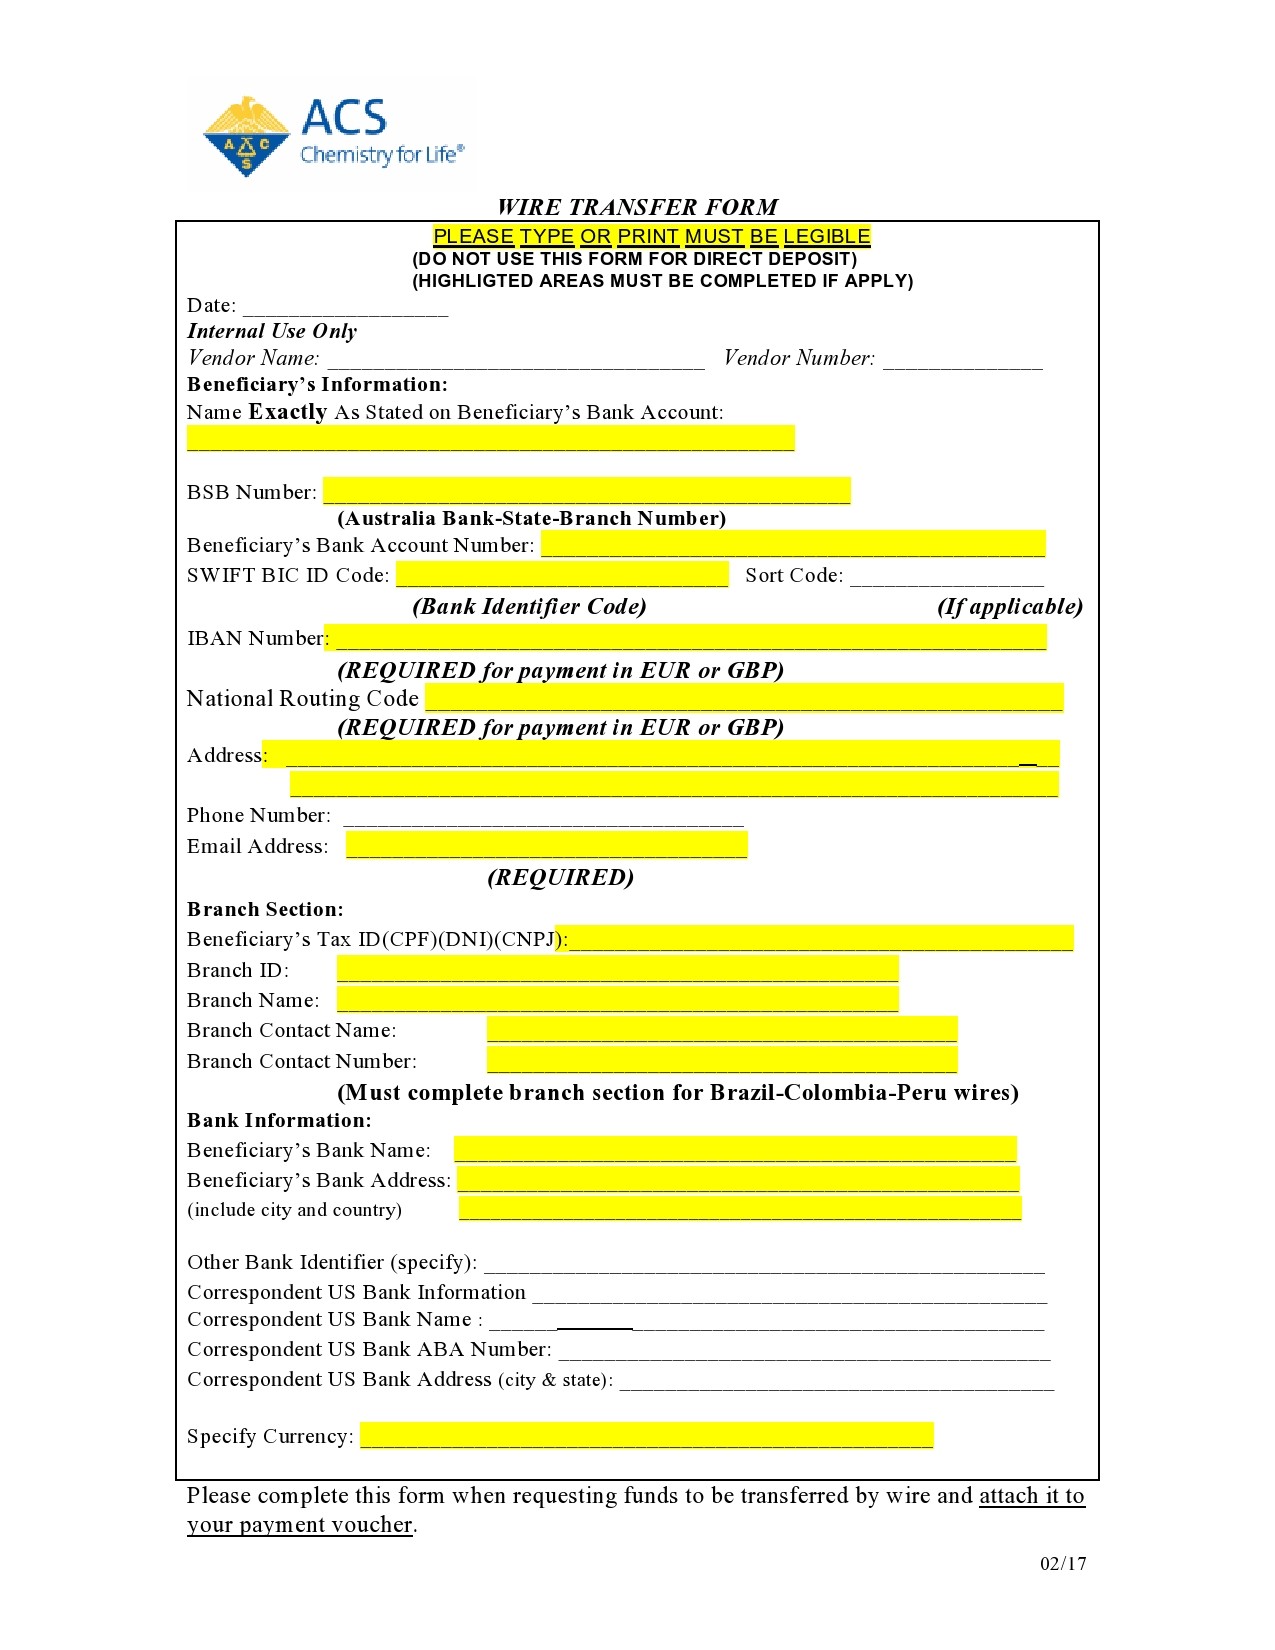 Free wire transfer form 05